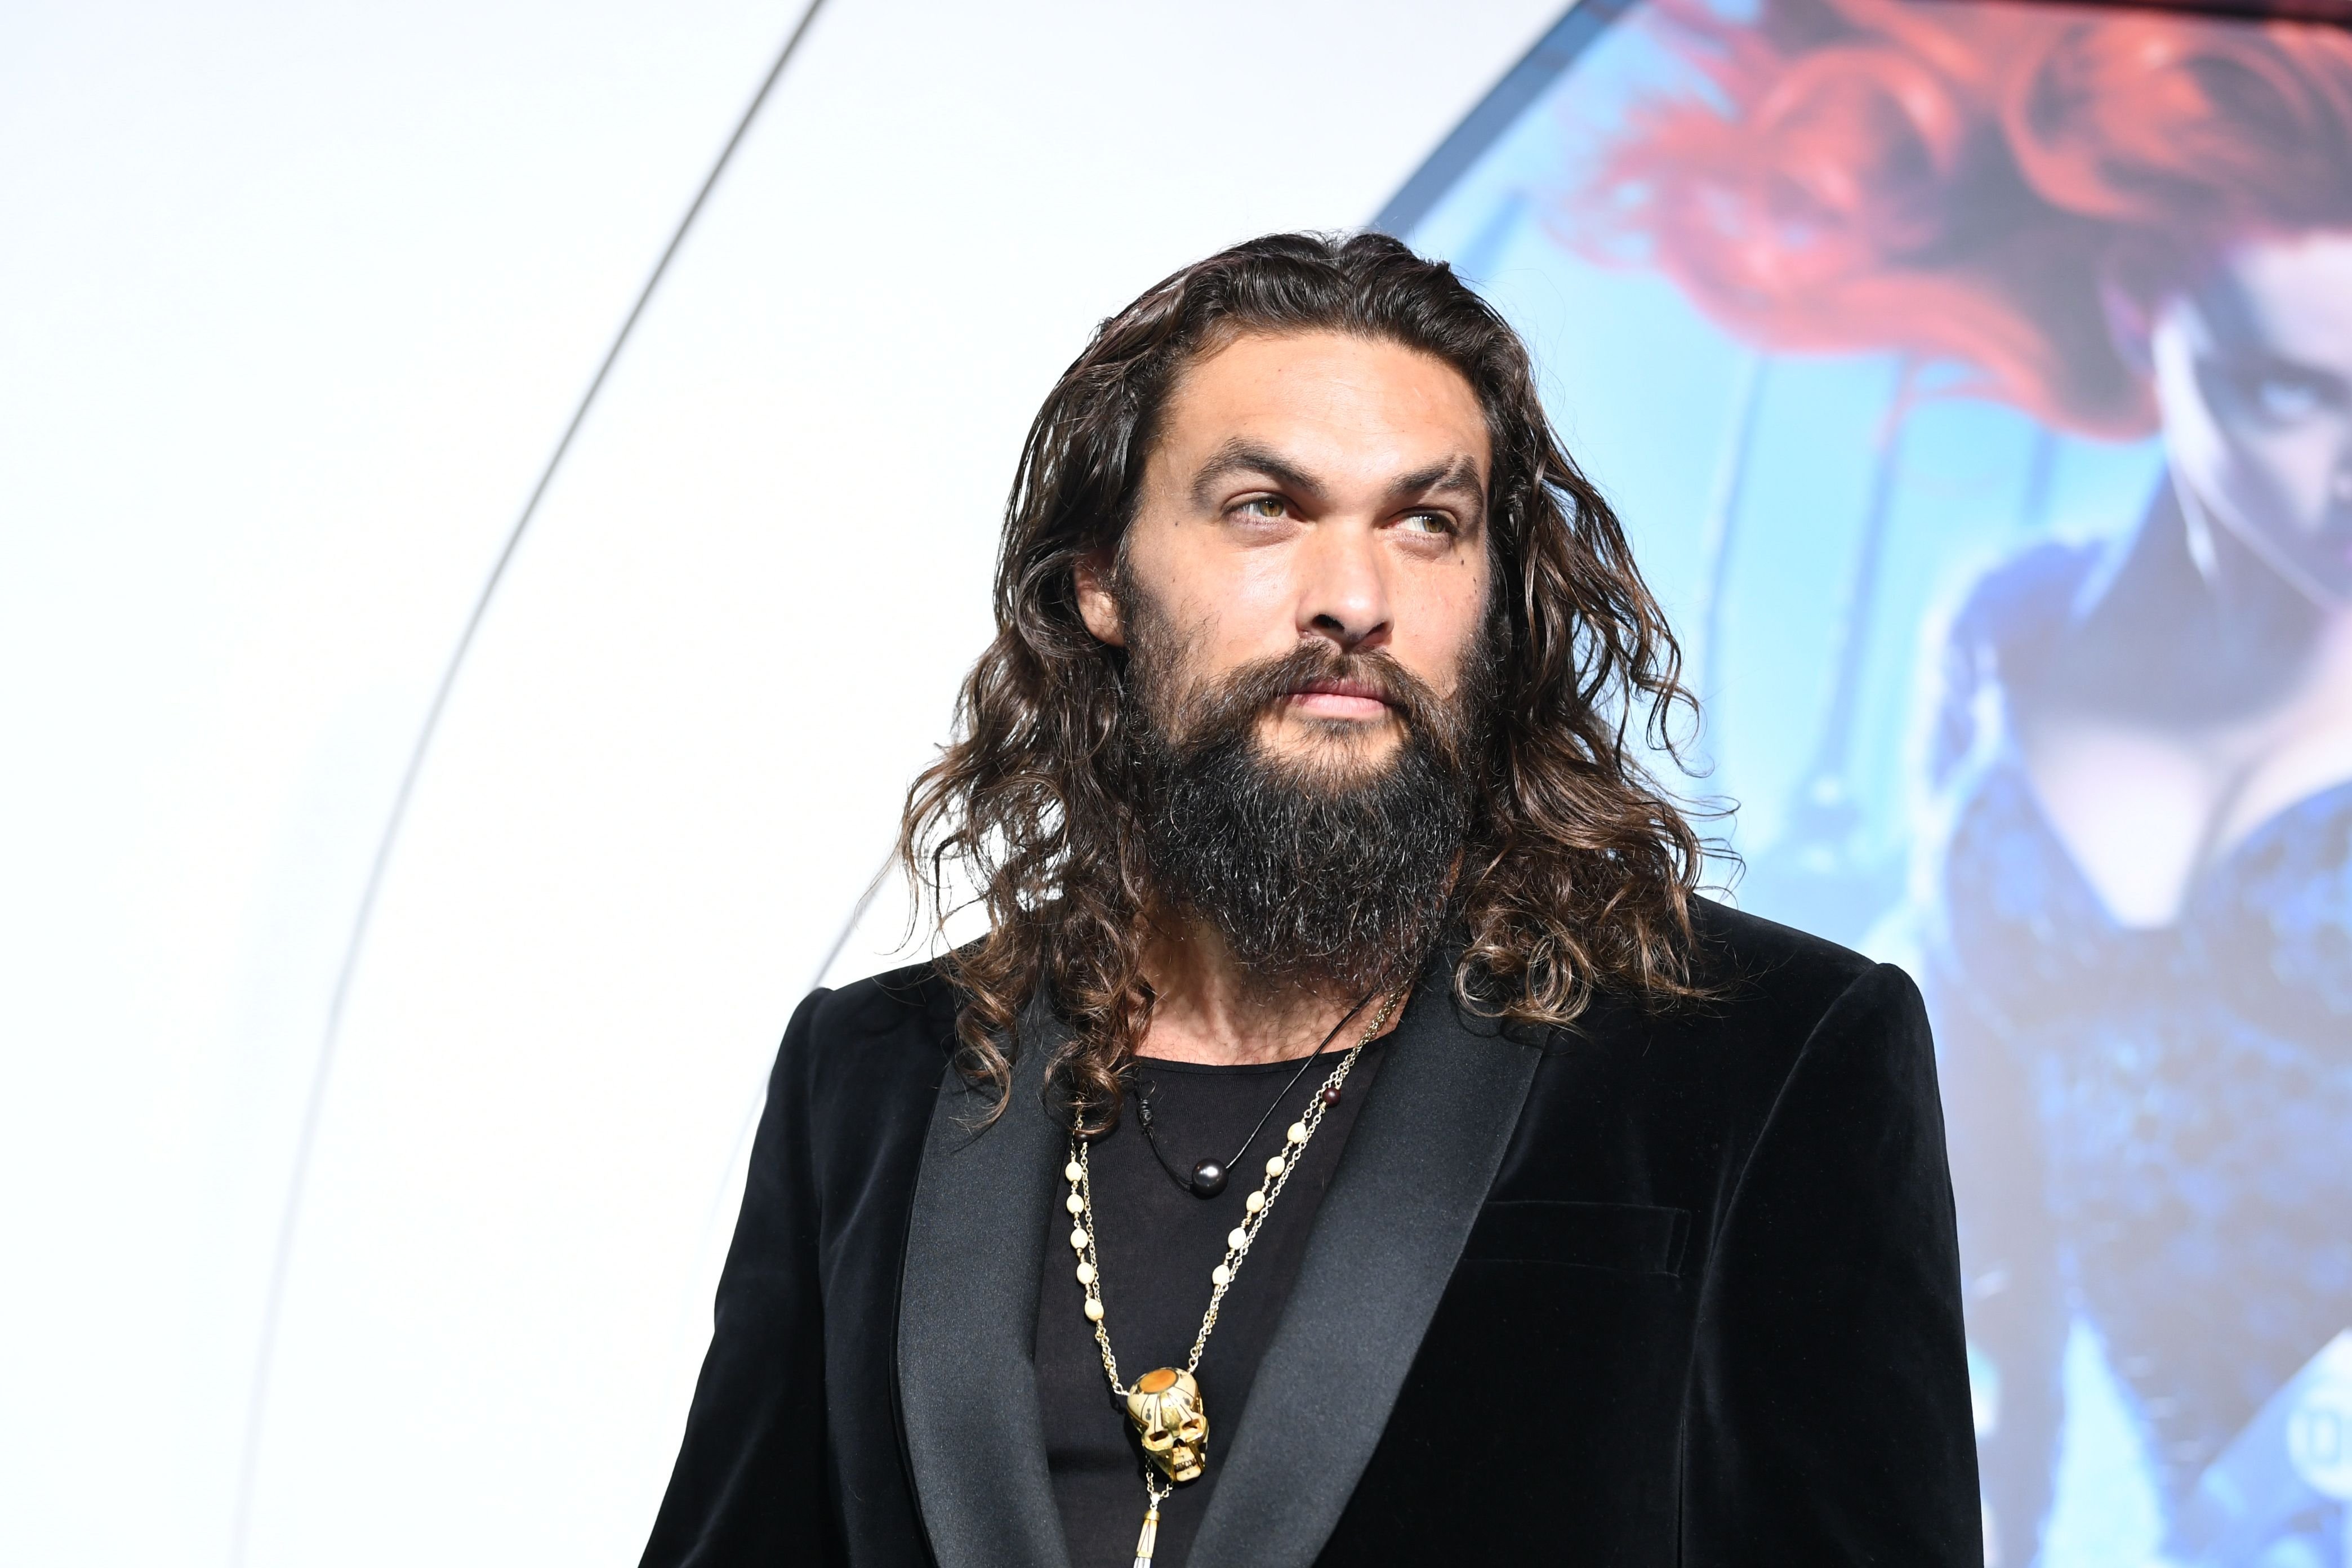  Jason Momoa at the premiere of "Aquaman" on December 12, 2018 in Los Angeles. | Source: Getty Images